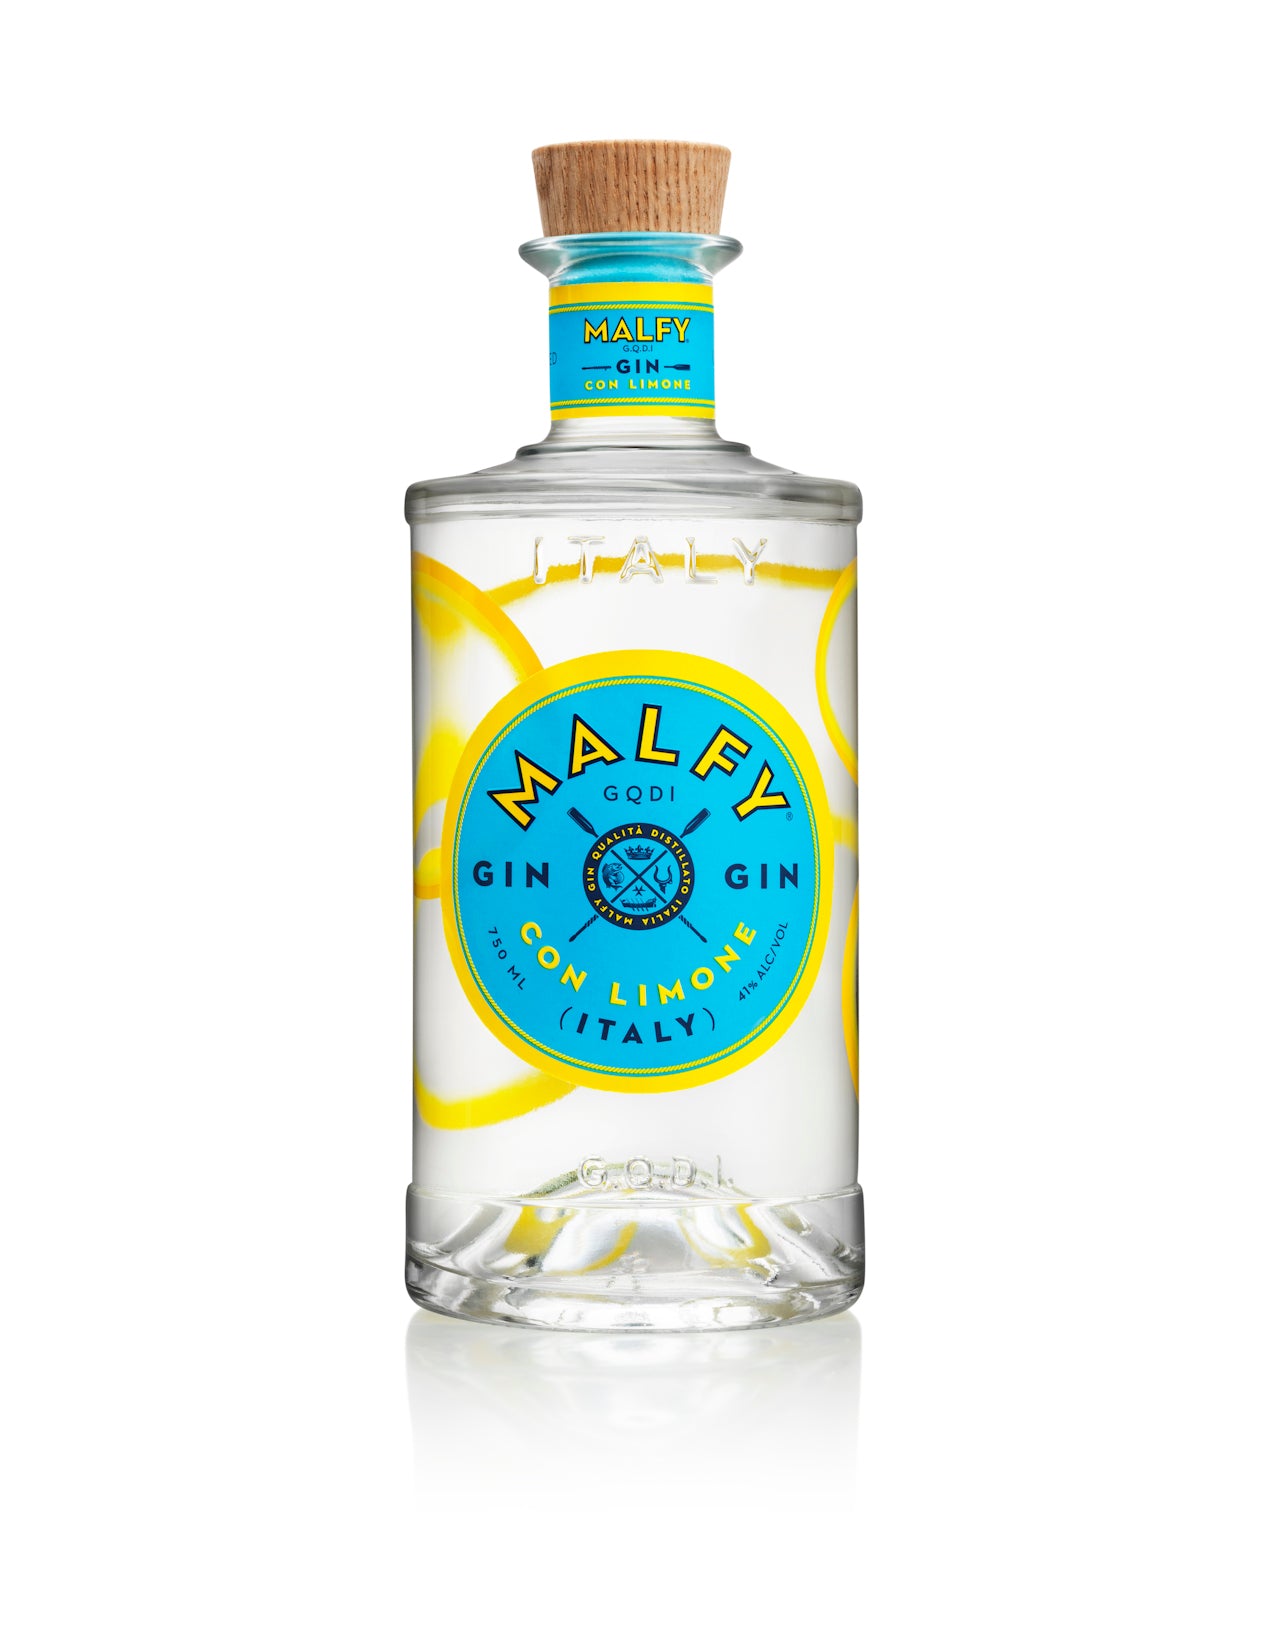 BUY] Malfy (RECOMMENDED) Gin Con at Limone